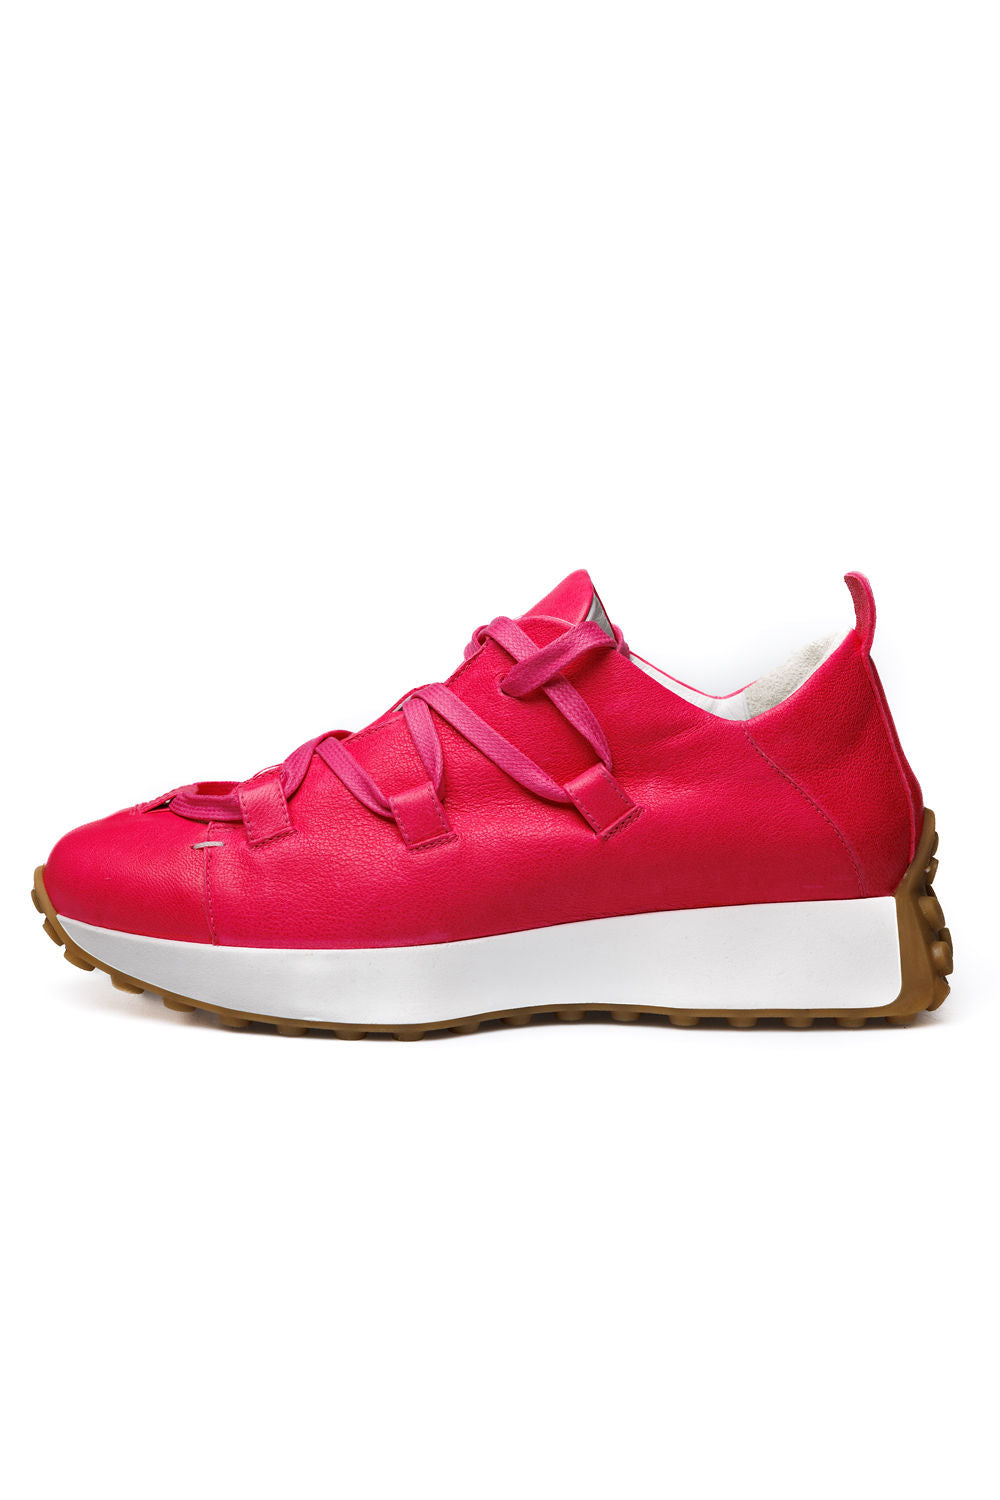 HENRY BEGUELIN Old Iron Leather Sneaker in Fuxia